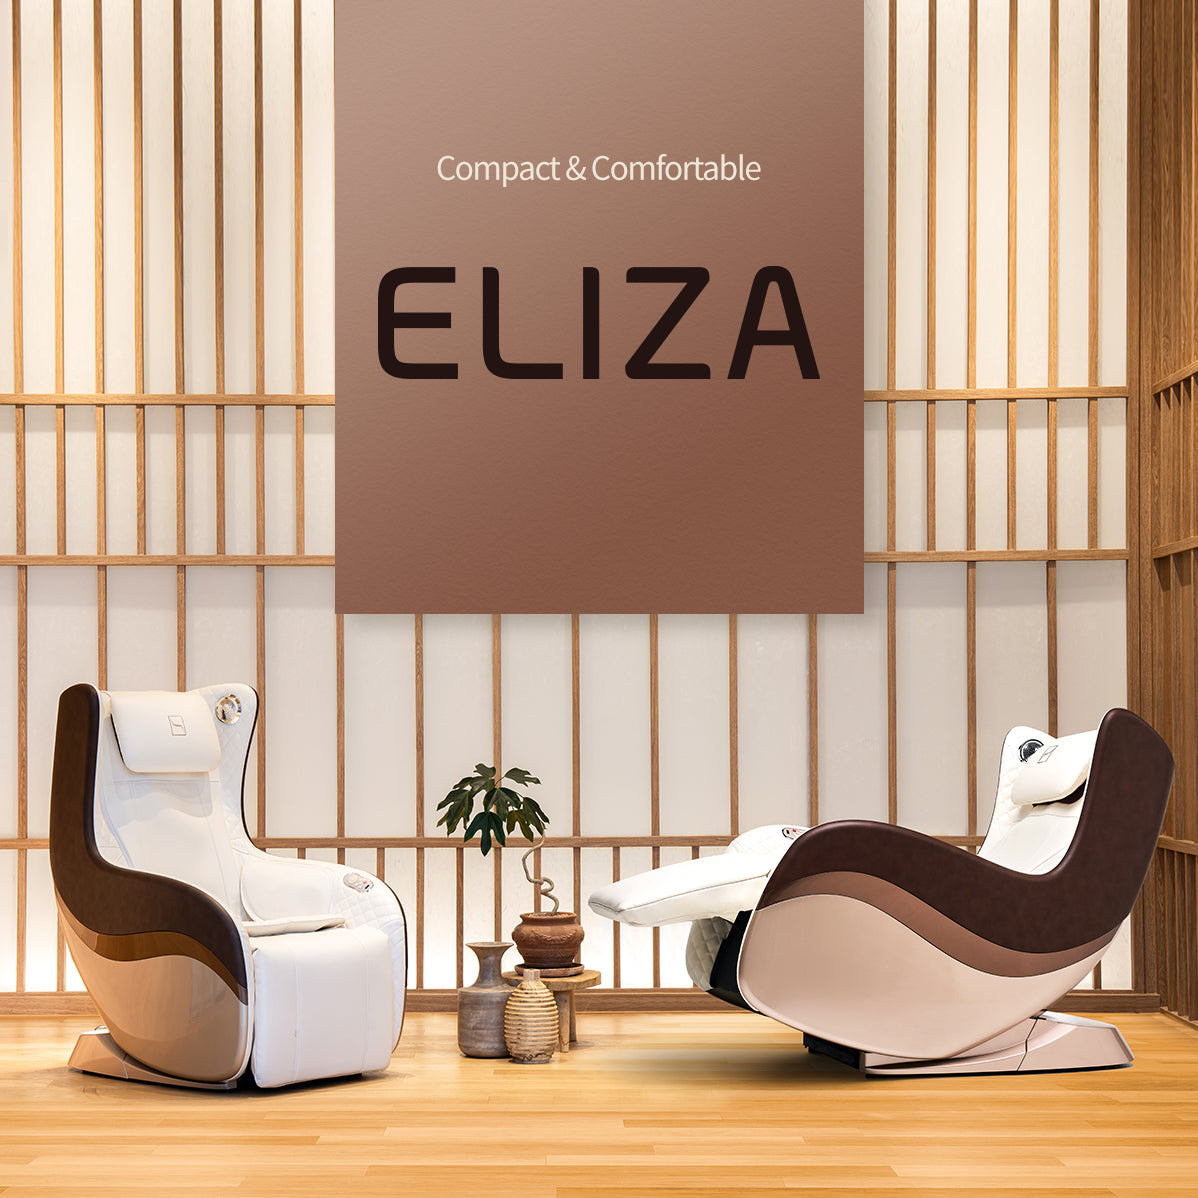 Picture of Eliza massage chair in the room